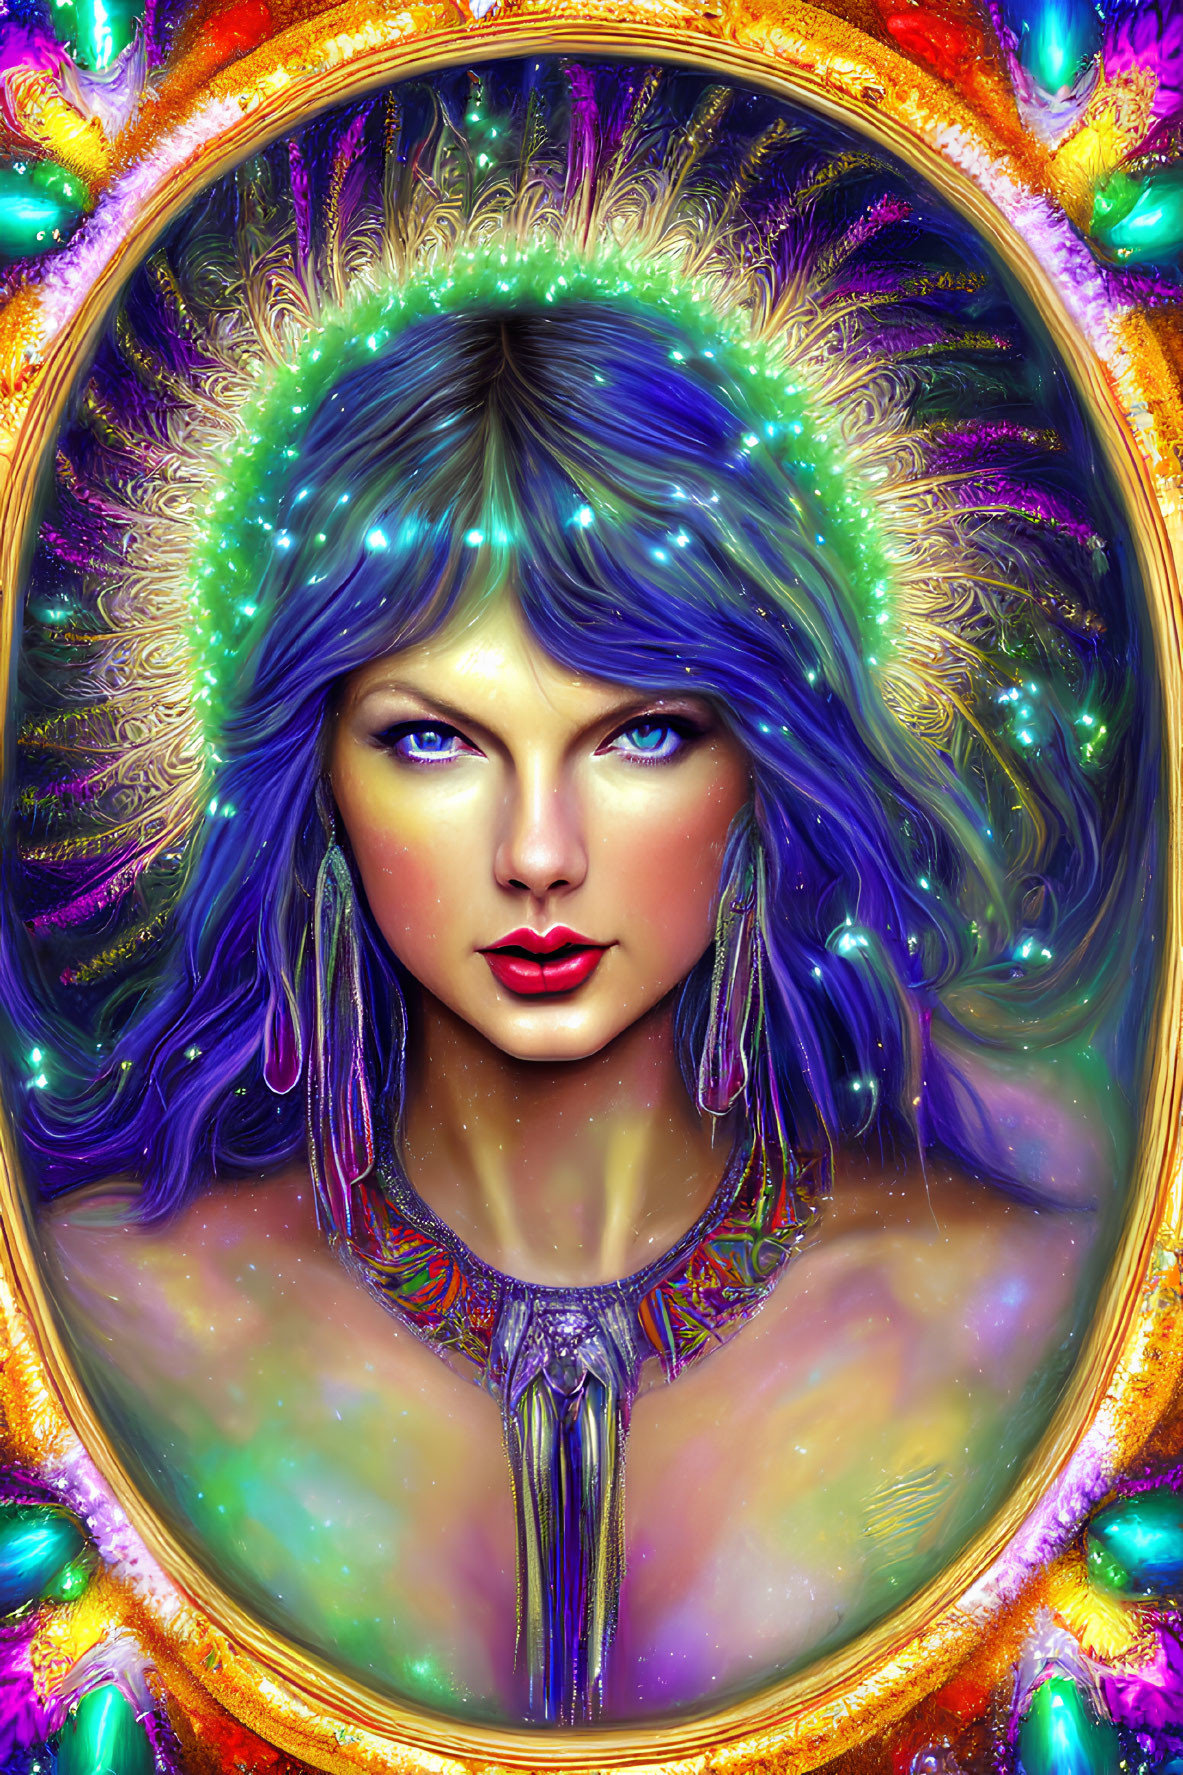 Colorful digital artwork: Woman with blue hair in golden frame with peacock feathers